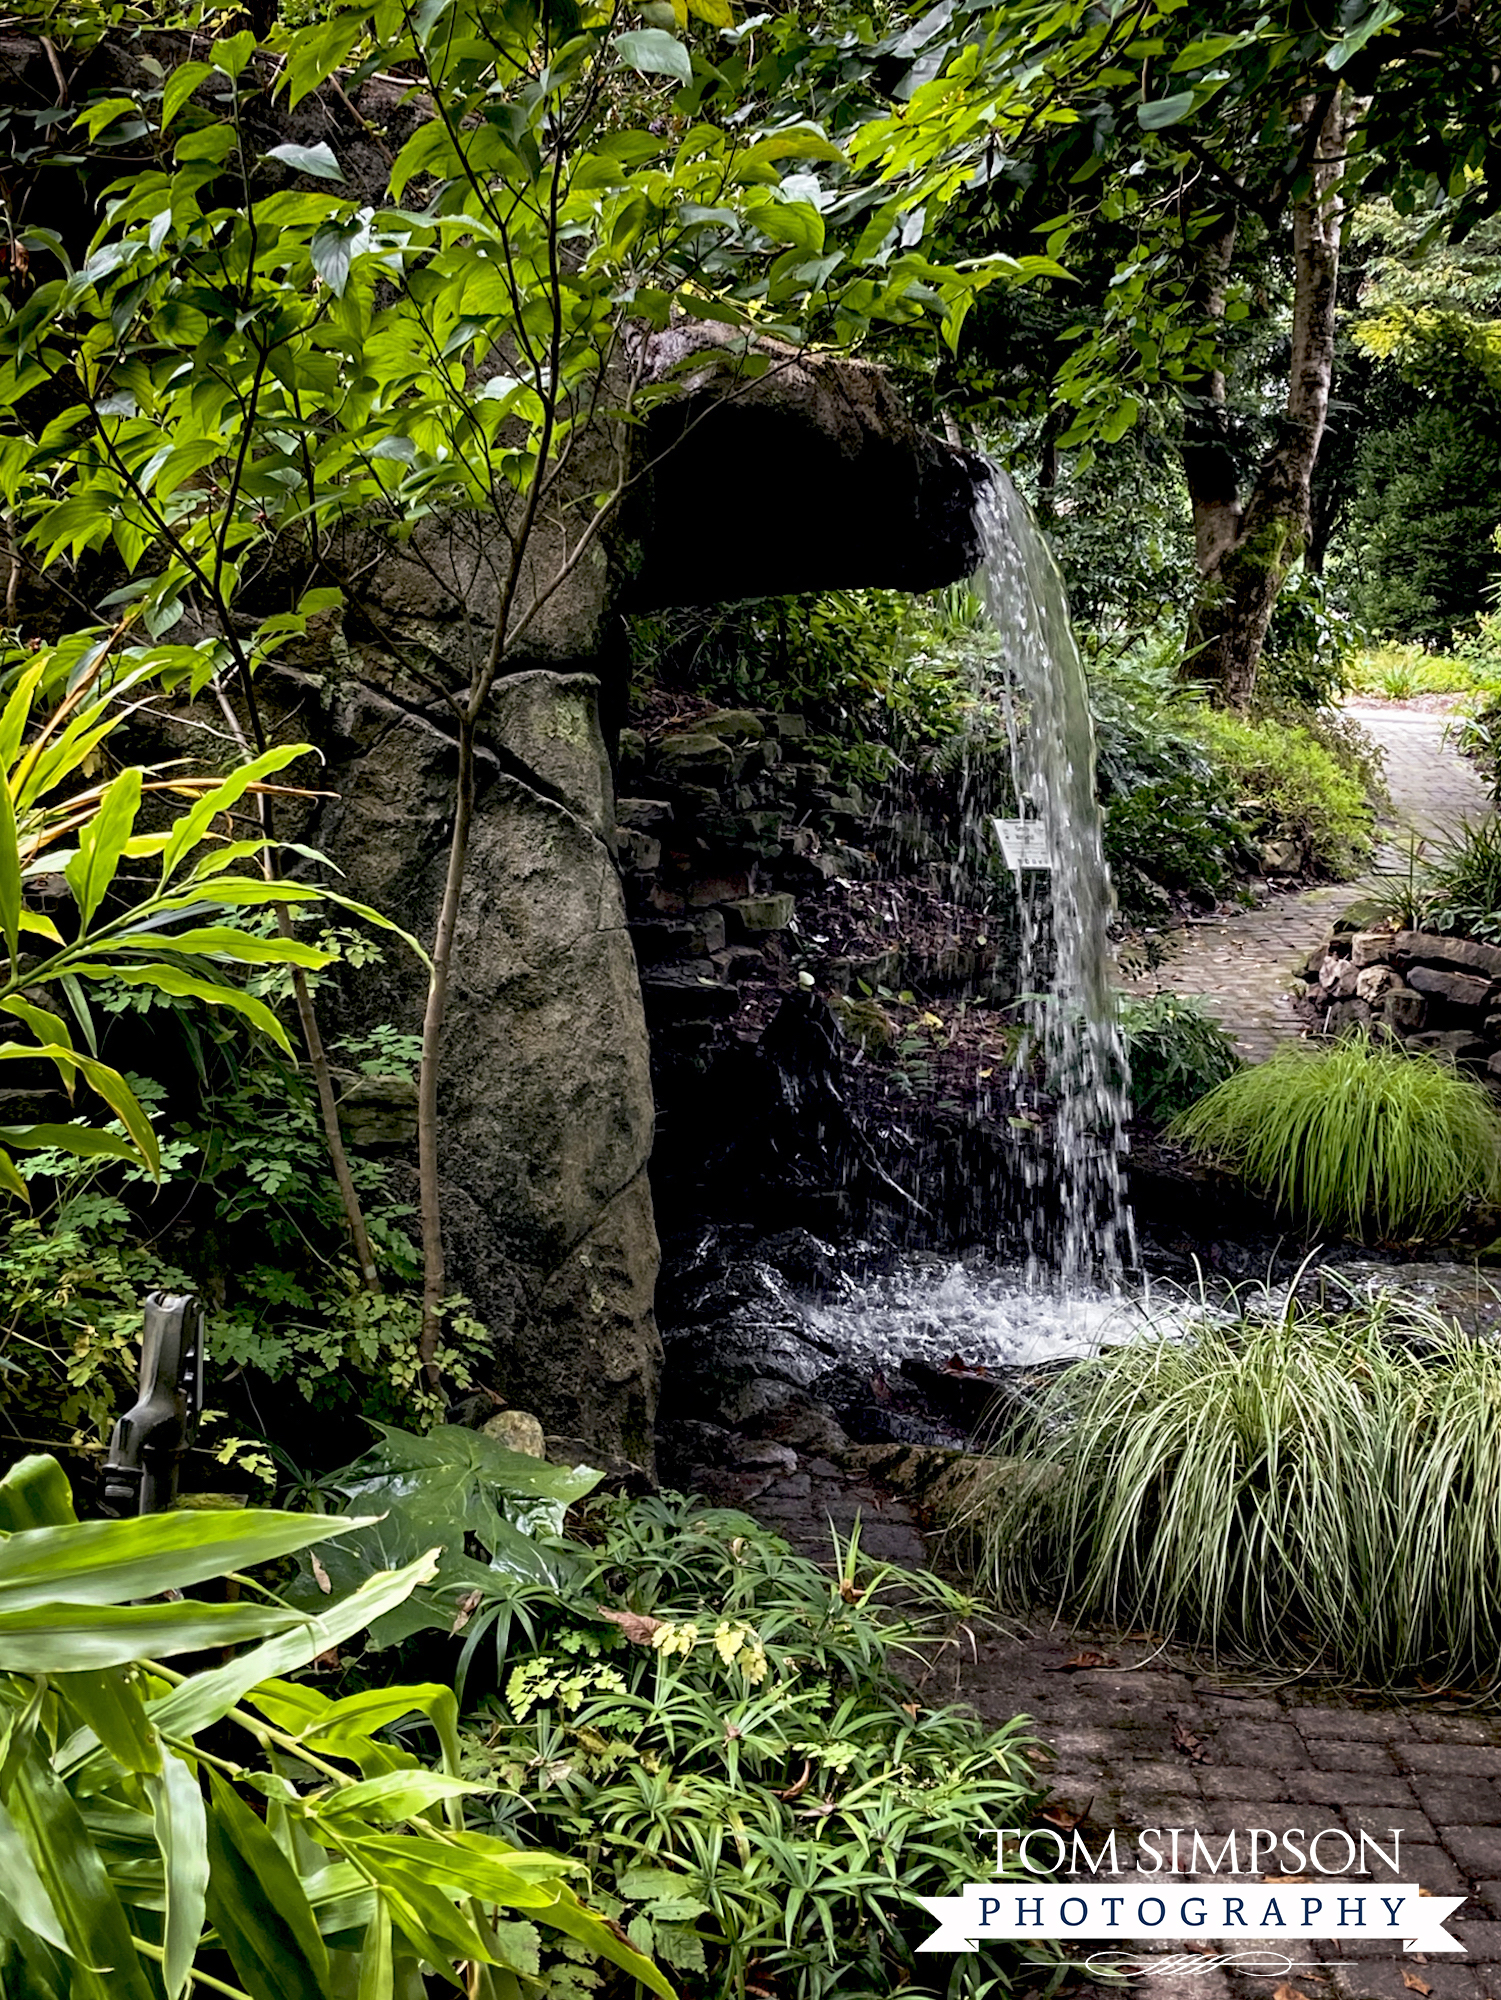 gardeners love waterfalls surrounded by plants